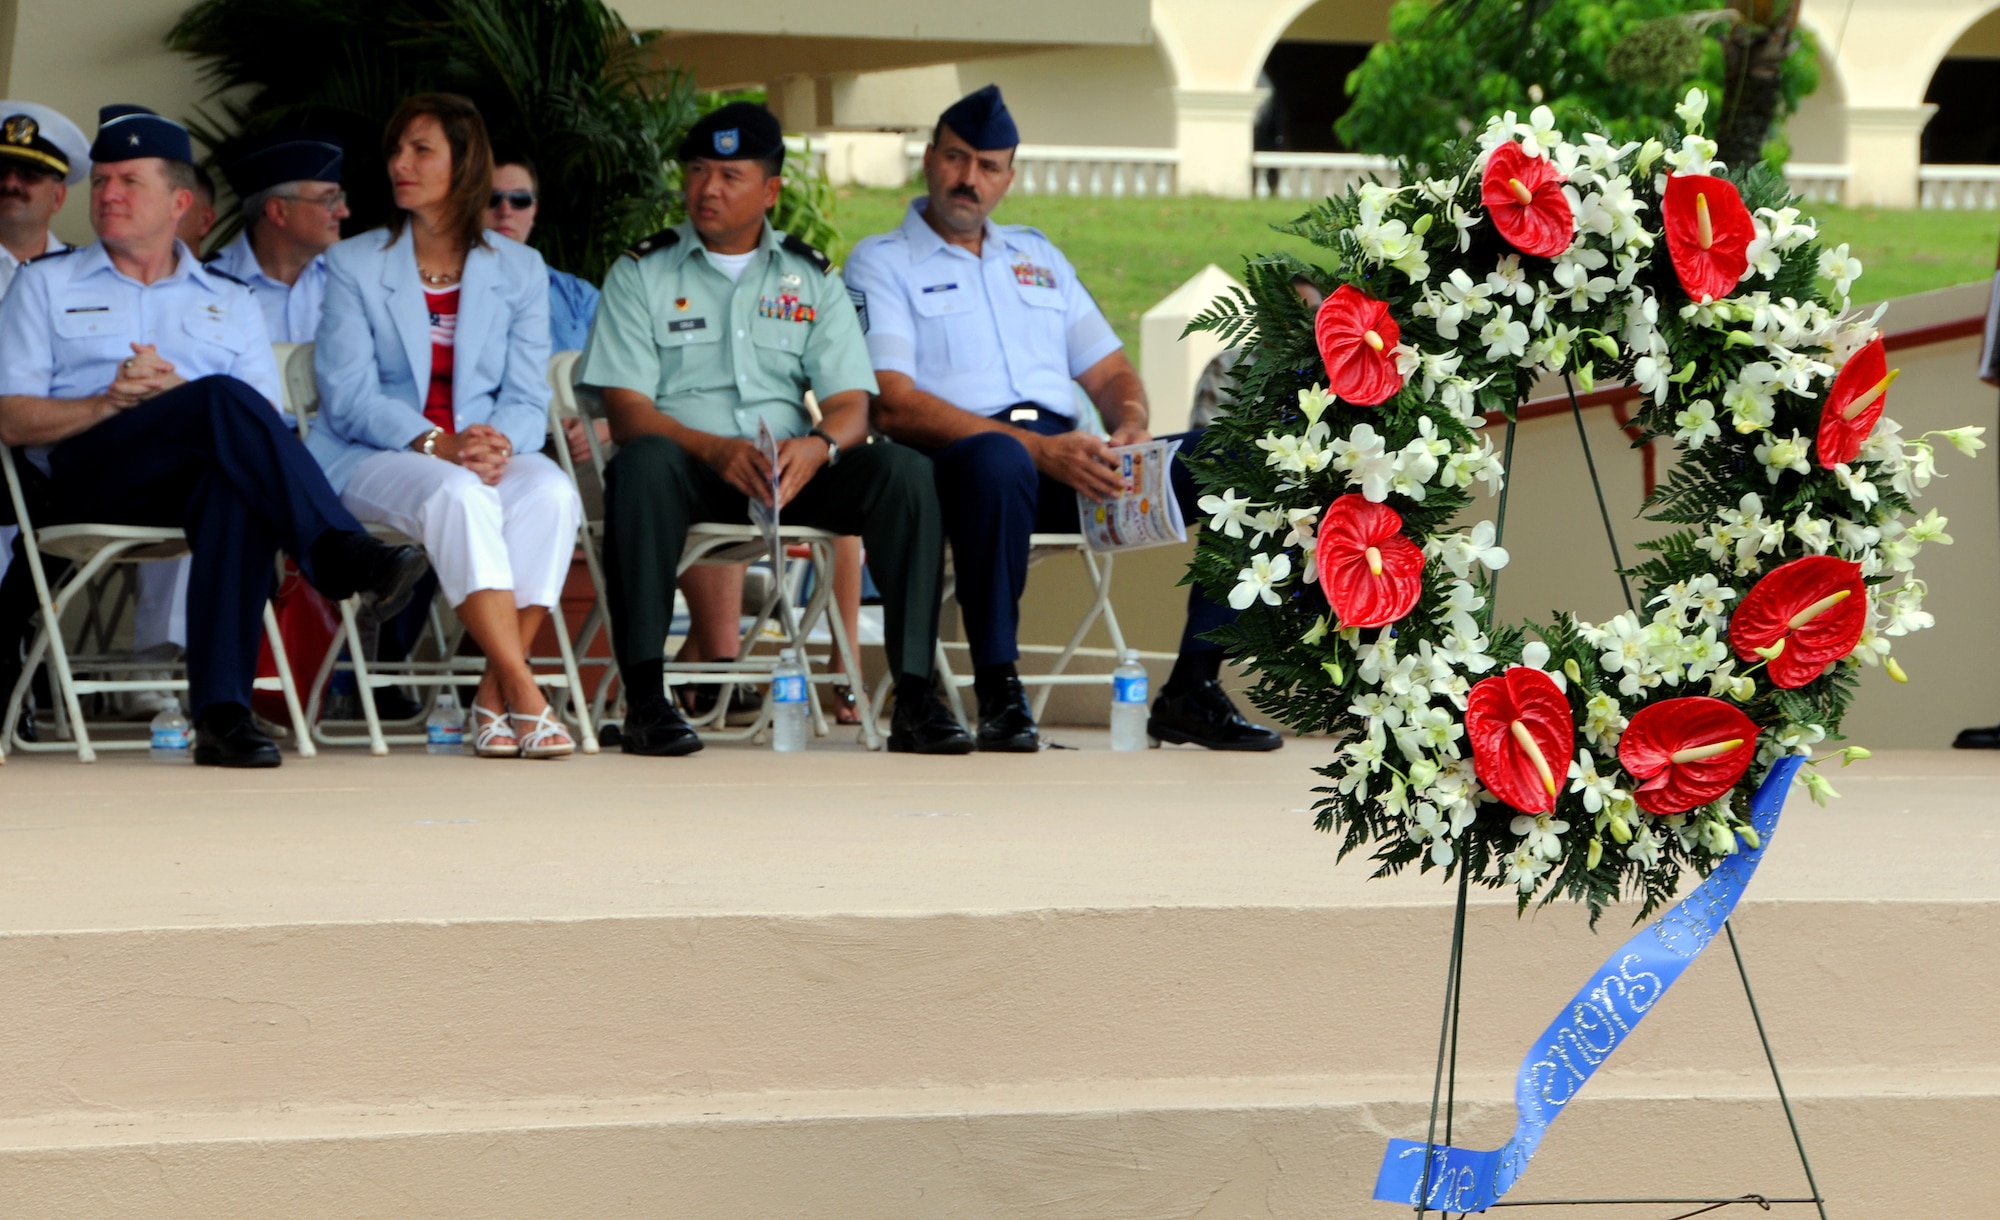 ANDERSEN AIR FORCE BASE, Guam - Distinguished guests listen to speakers during the the Veterans Day Ceremony at the Ricardo J. Bordallo Governors Complex in Adelup, Guam Nov. 11. (U.S. Air Force photo by Airman 1st Class Courtney Witt)

